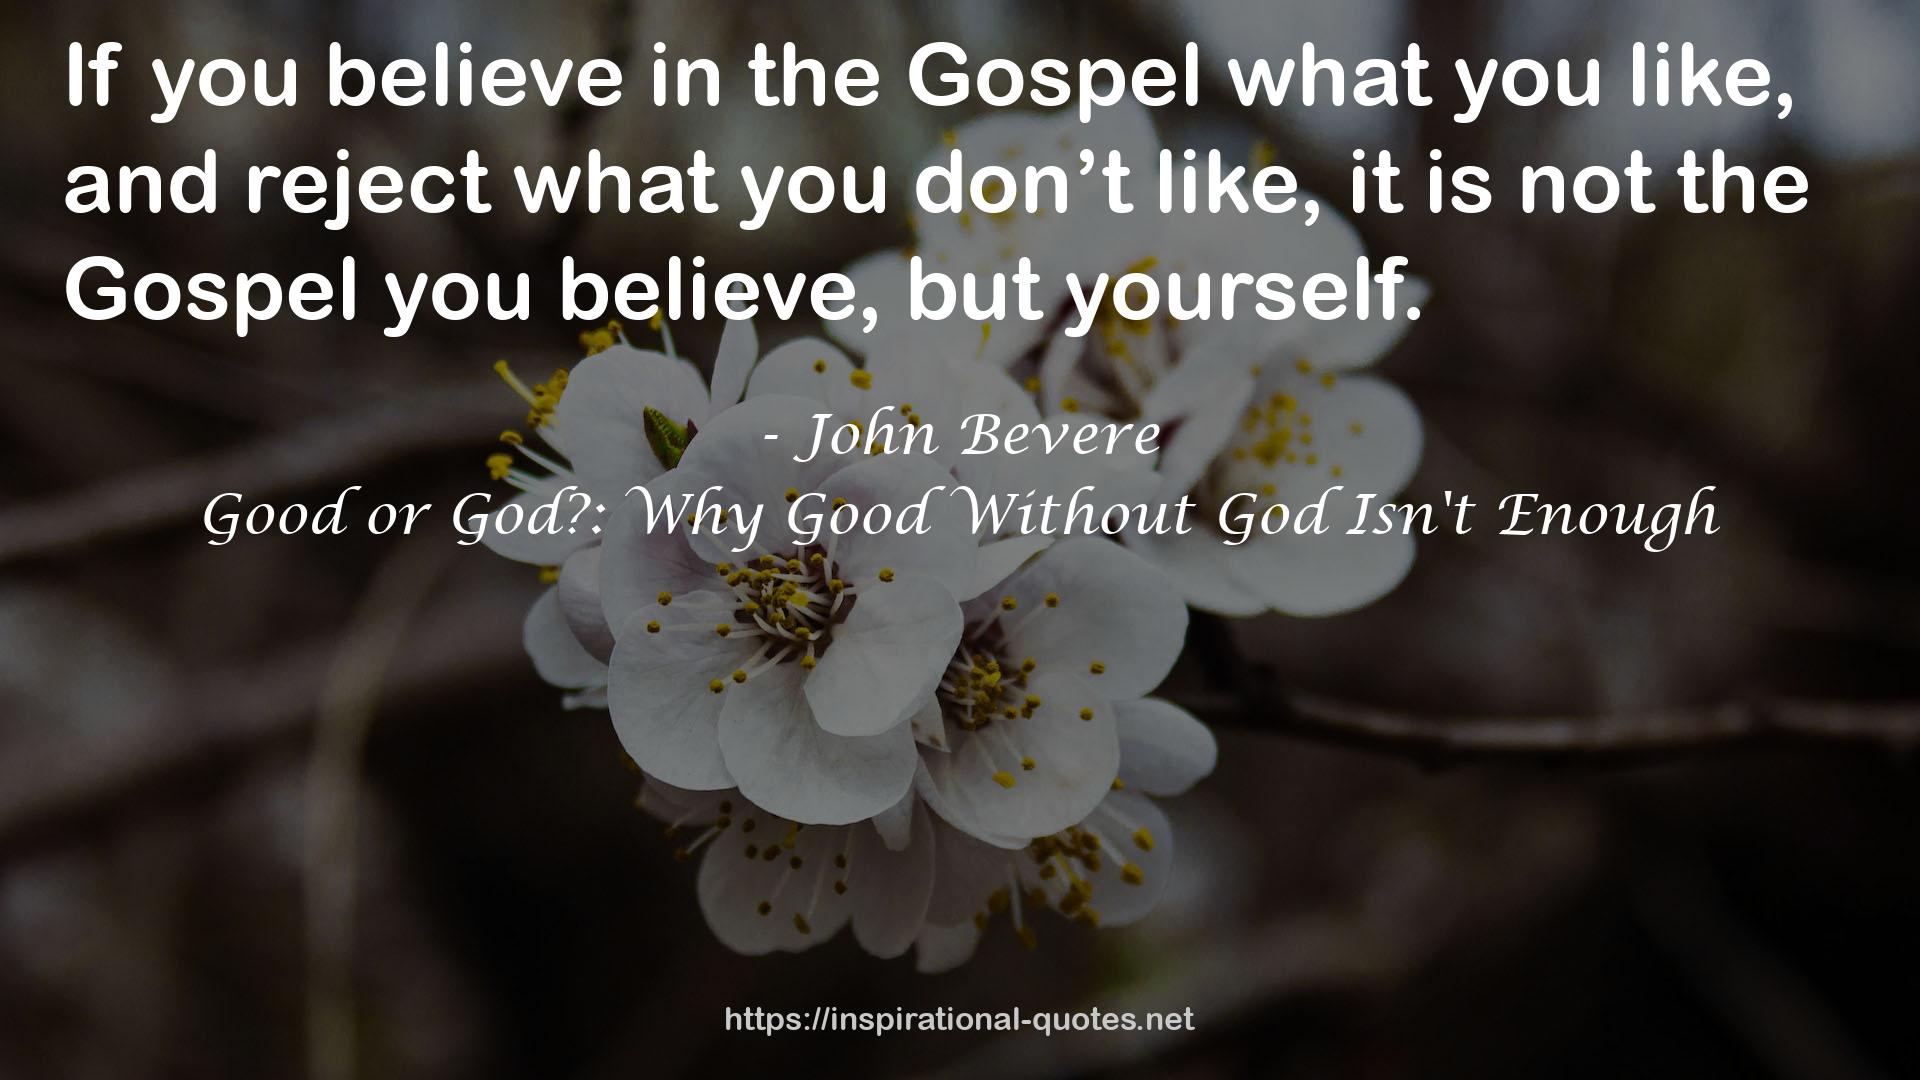 Good or God?: Why Good Without God Isn't Enough QUOTES